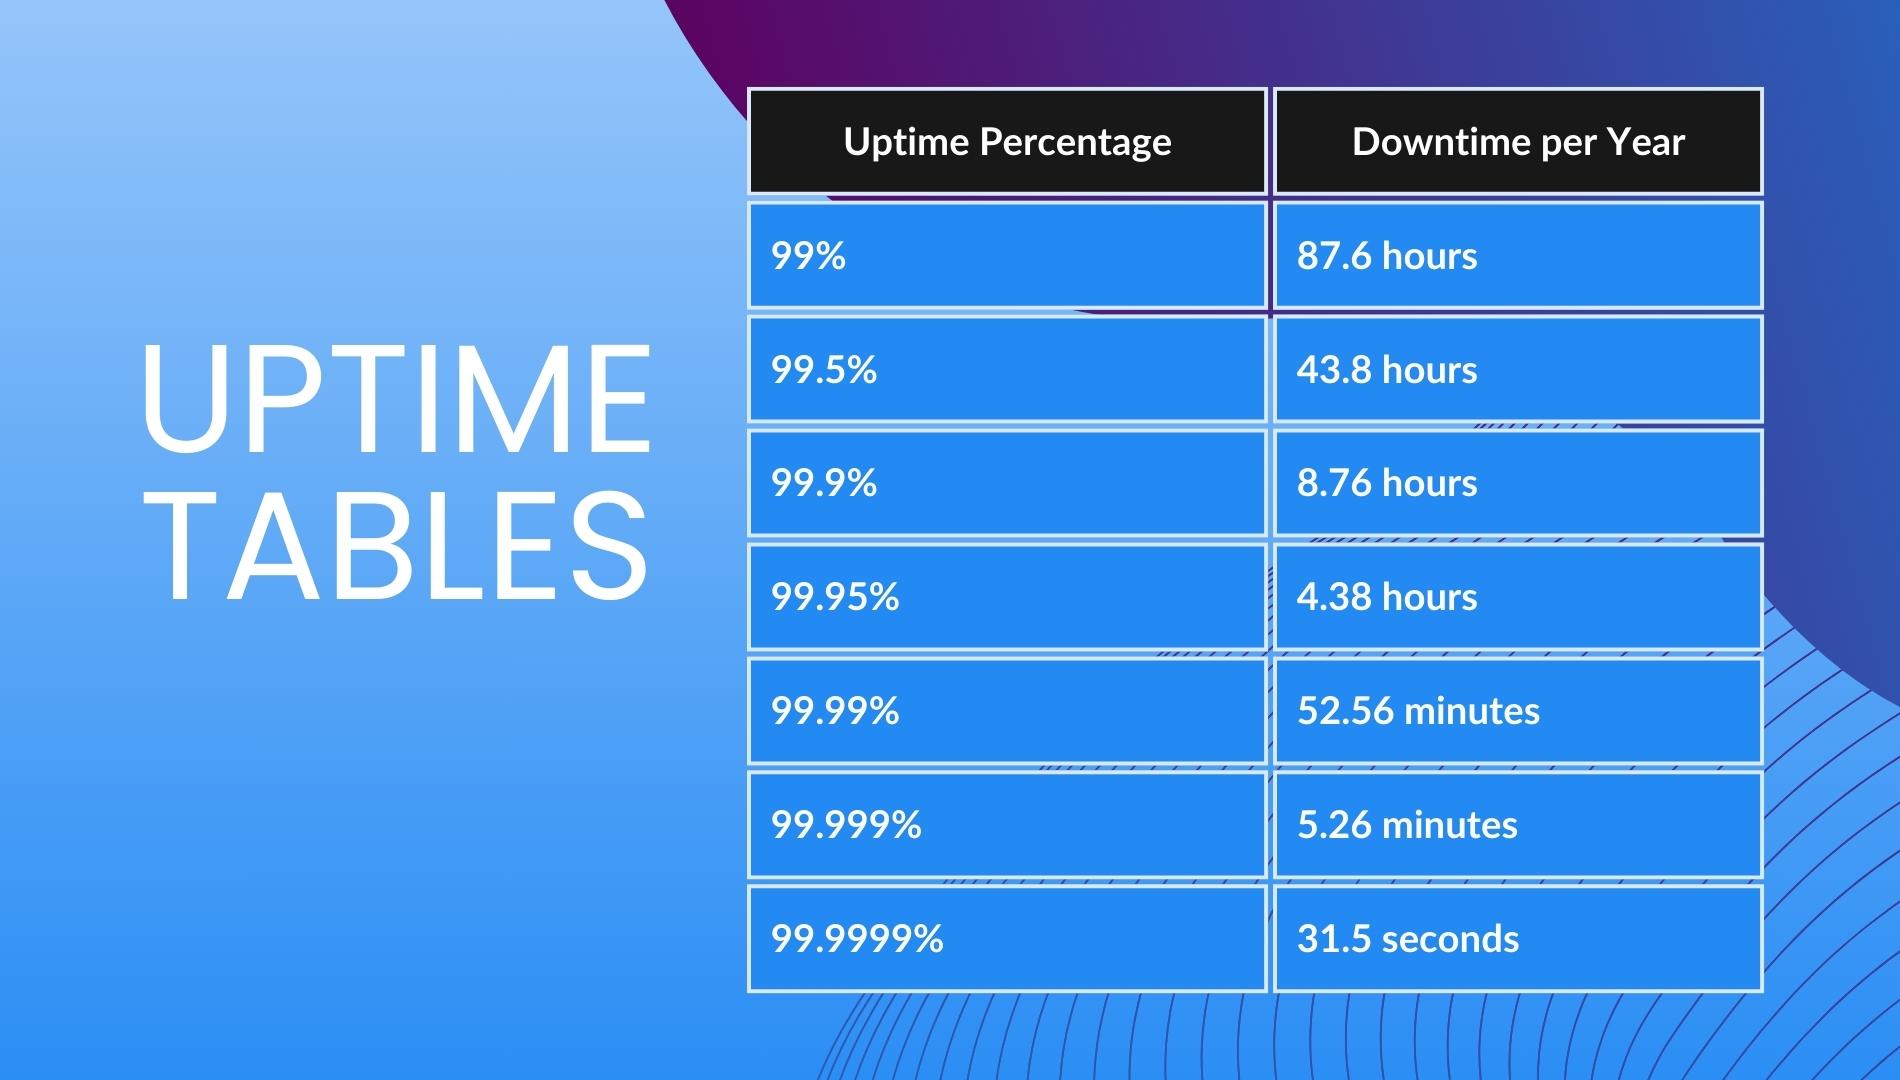 Each level of uptime 